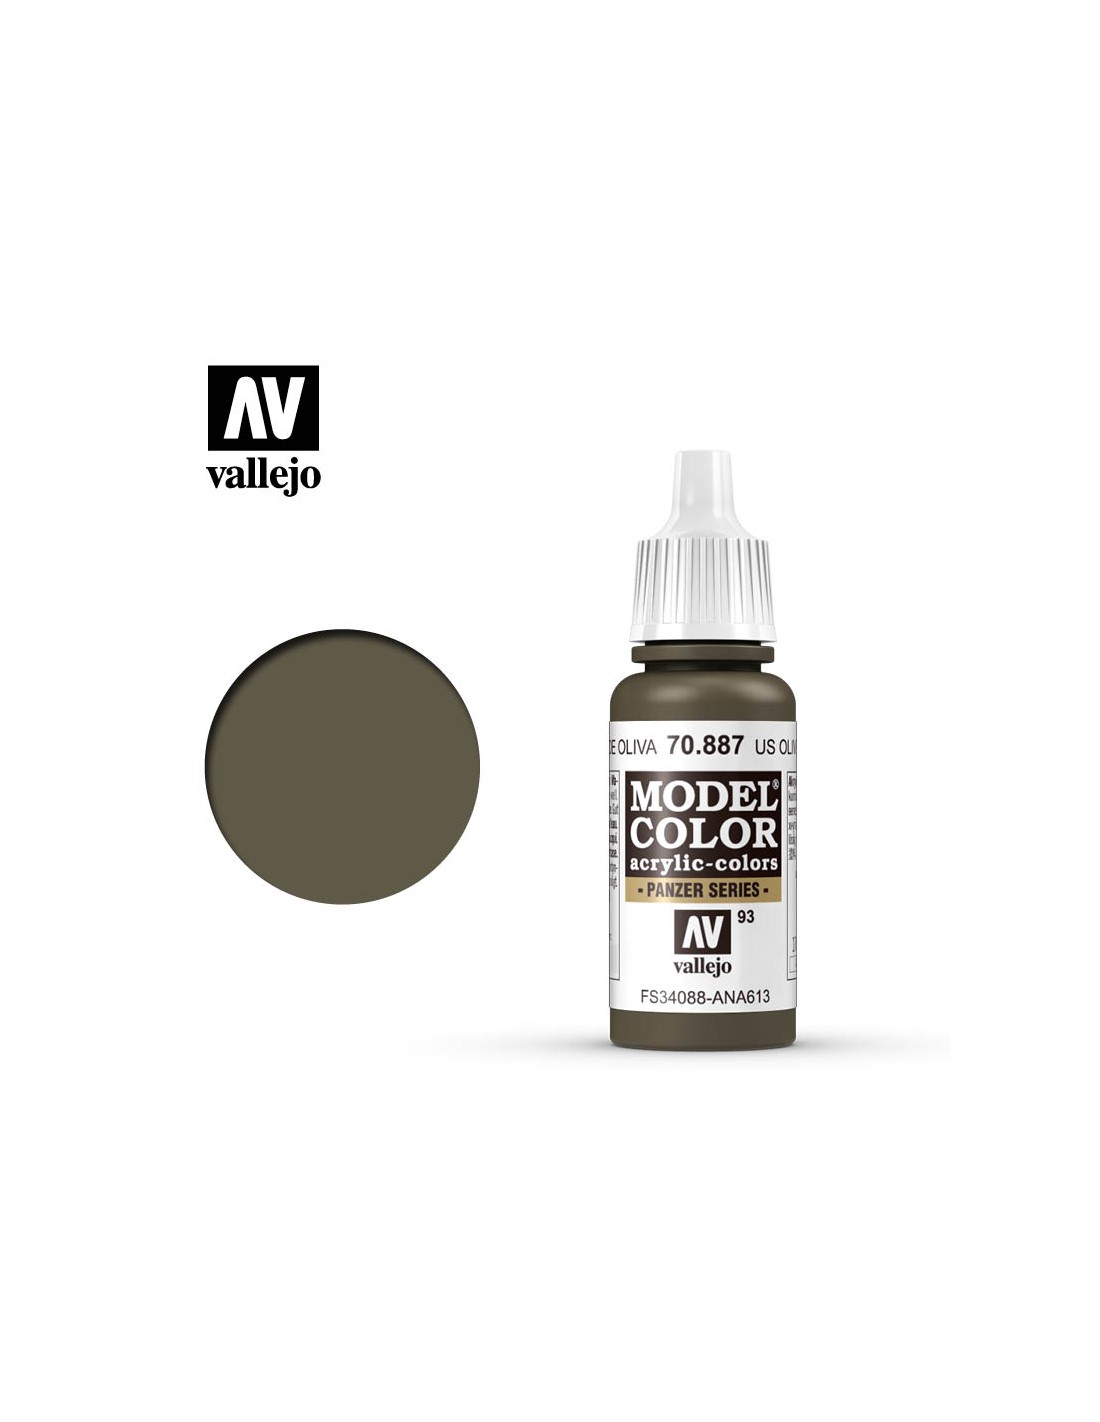 MODELCOLOR 70.887 US Olive Drab